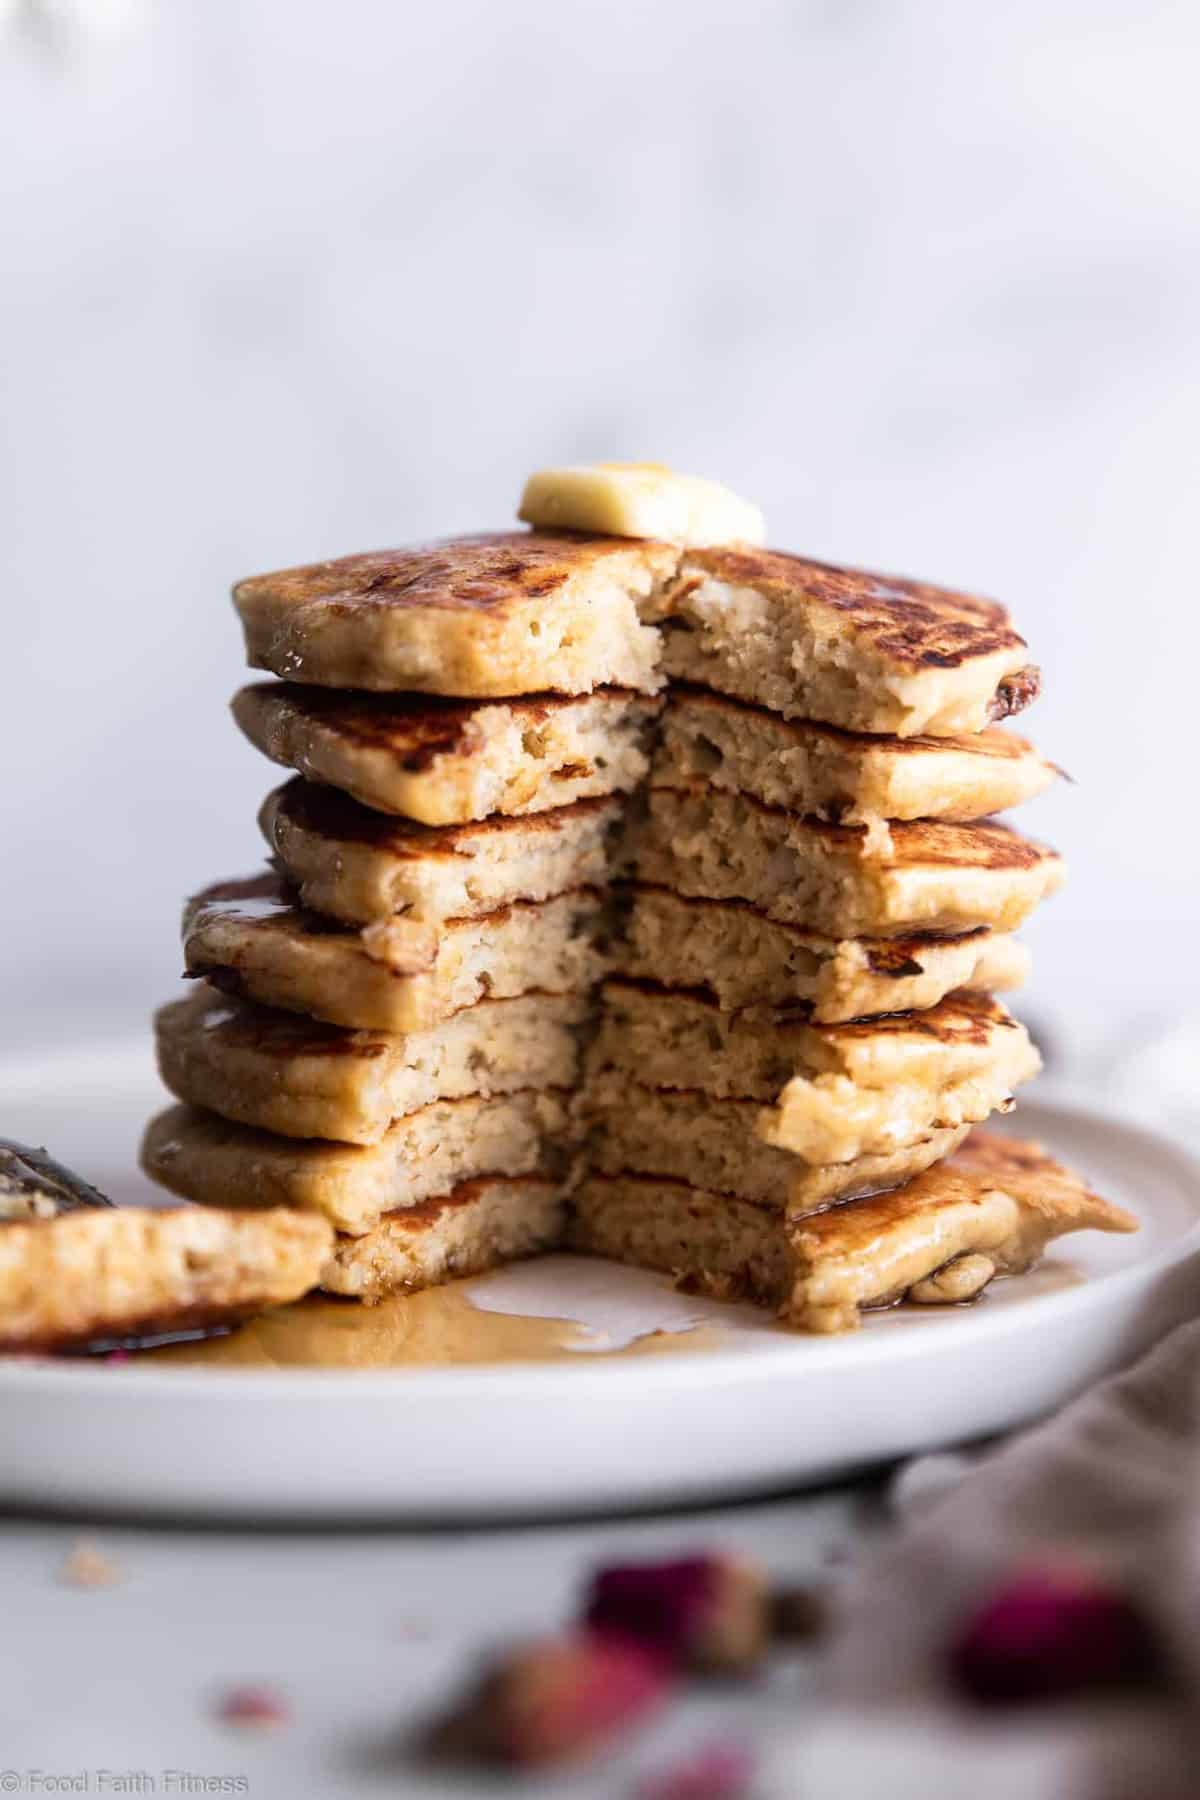 Fluffy Cottage Cheese Pancakes - These easy pancakes naturally gluten free and protein packed! Make them ahead for healthy breakfasts or make them on weekends! Great for kids and adults. | #Foodfaithfitness | 